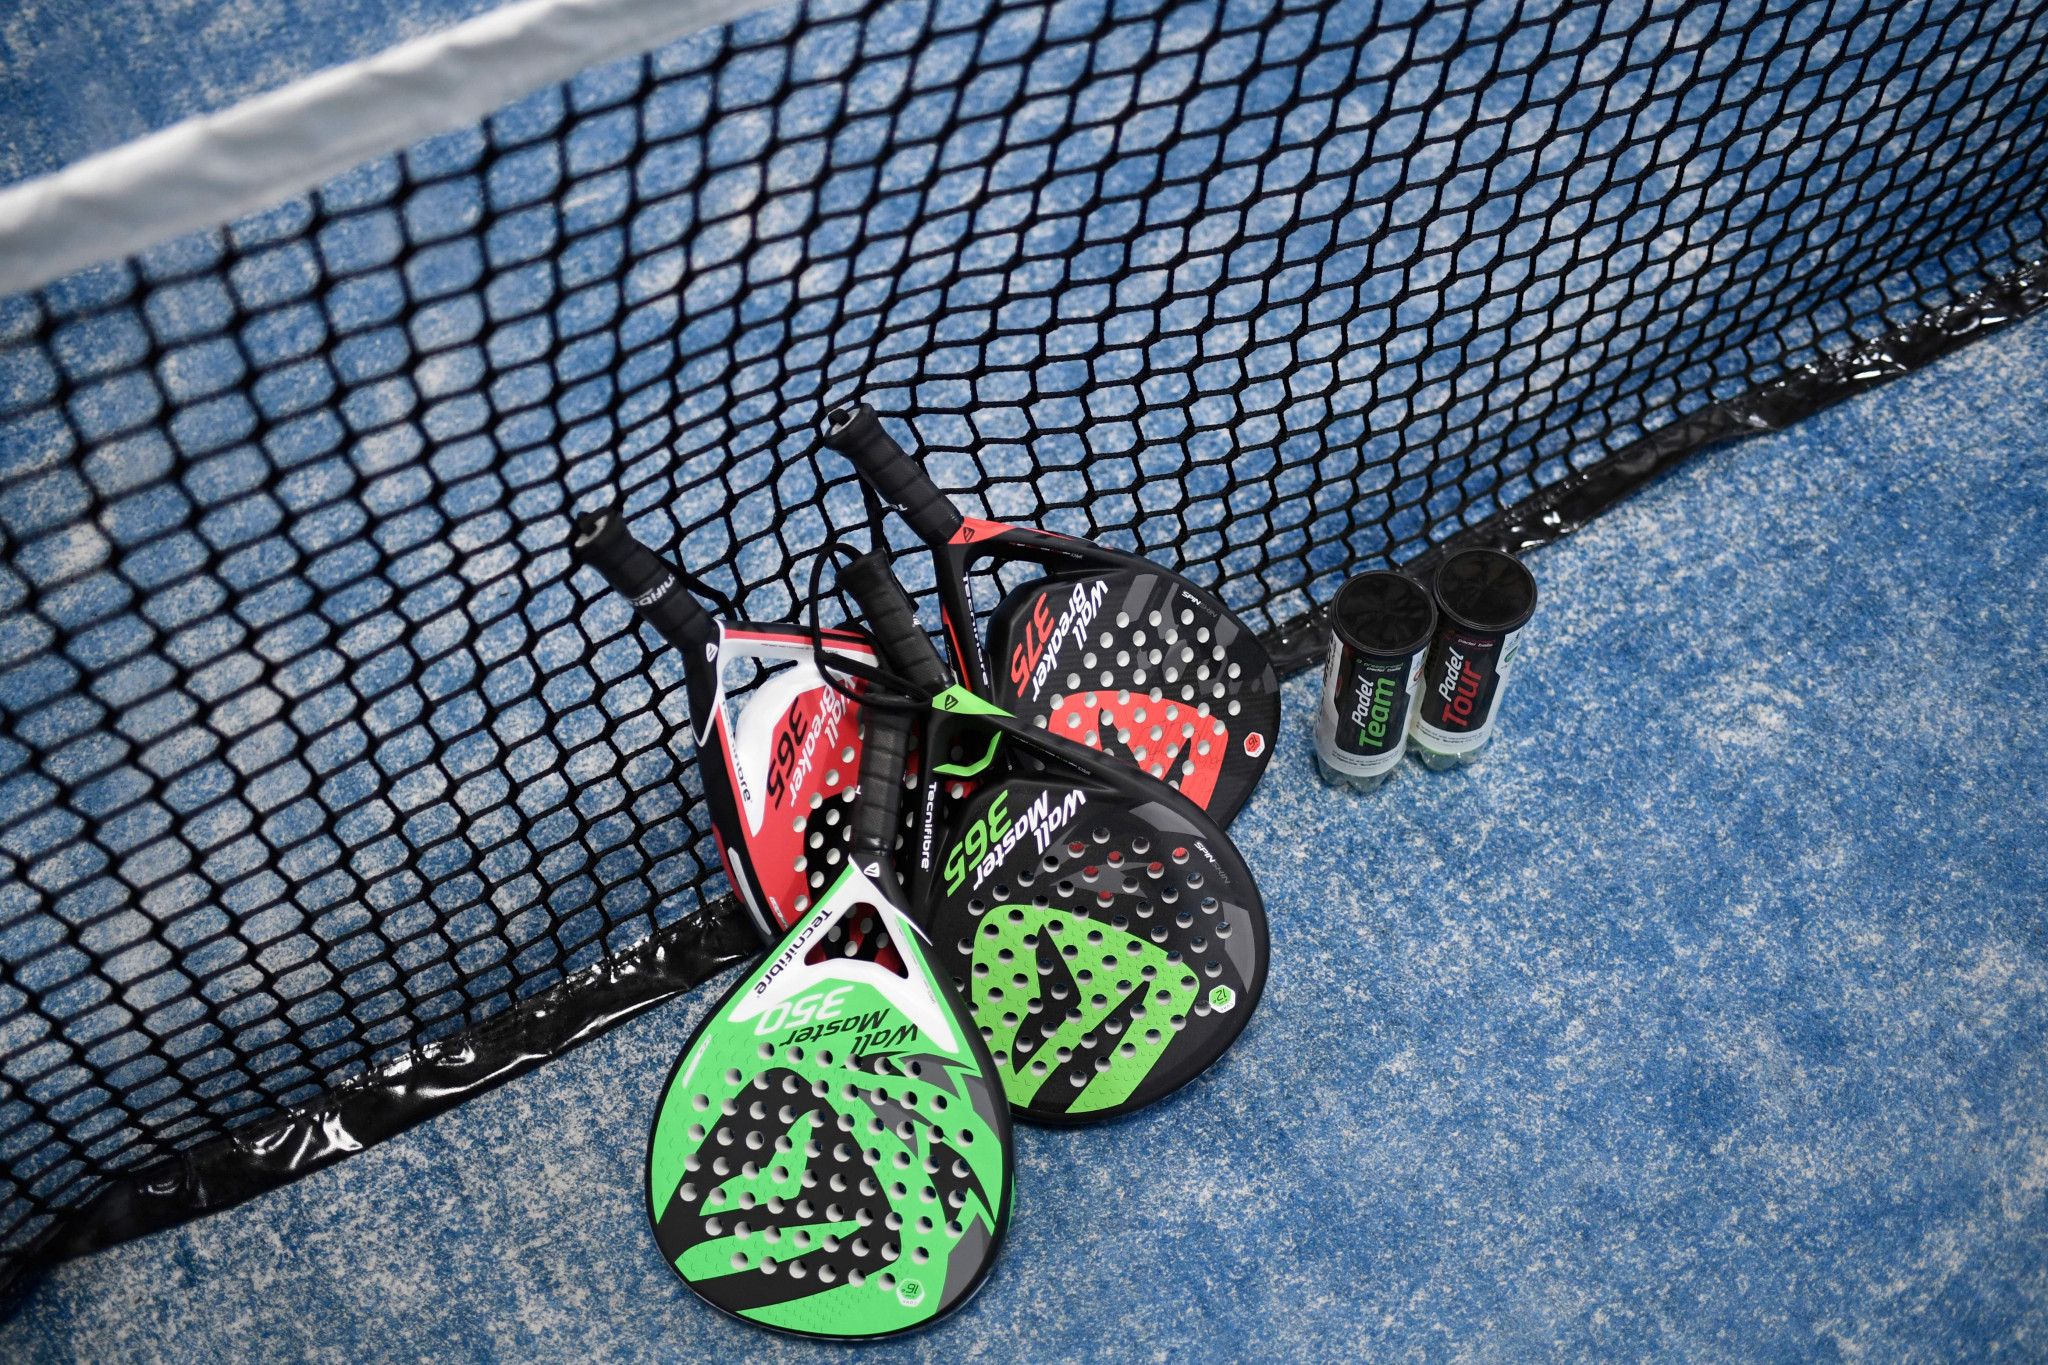 Spain clinch men's and women's double at World Padel Championships